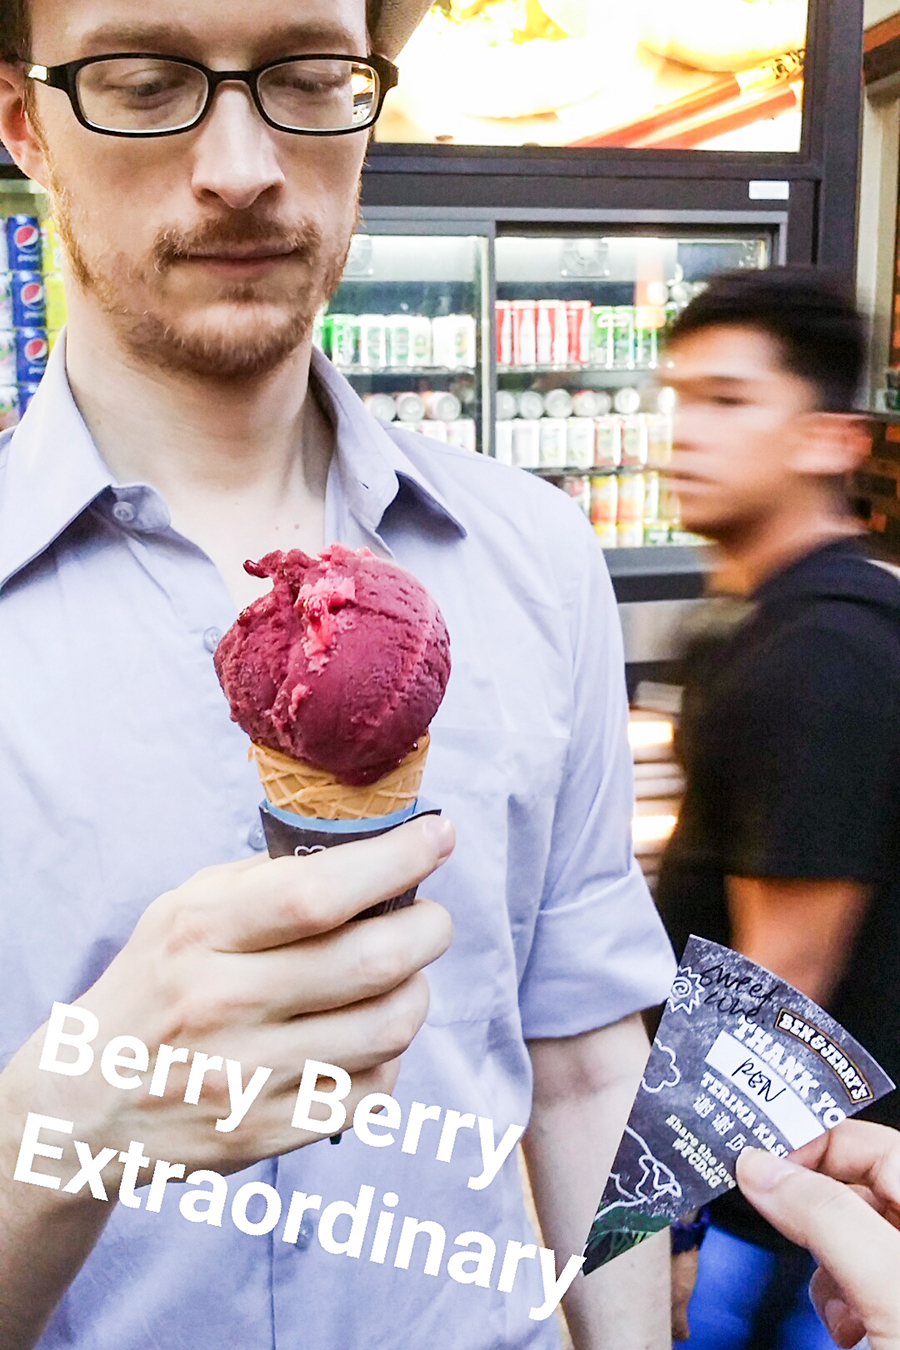 Ben & Jerry's Free Cone Day on 12 April 2016: Berry Berry Extraordinary.